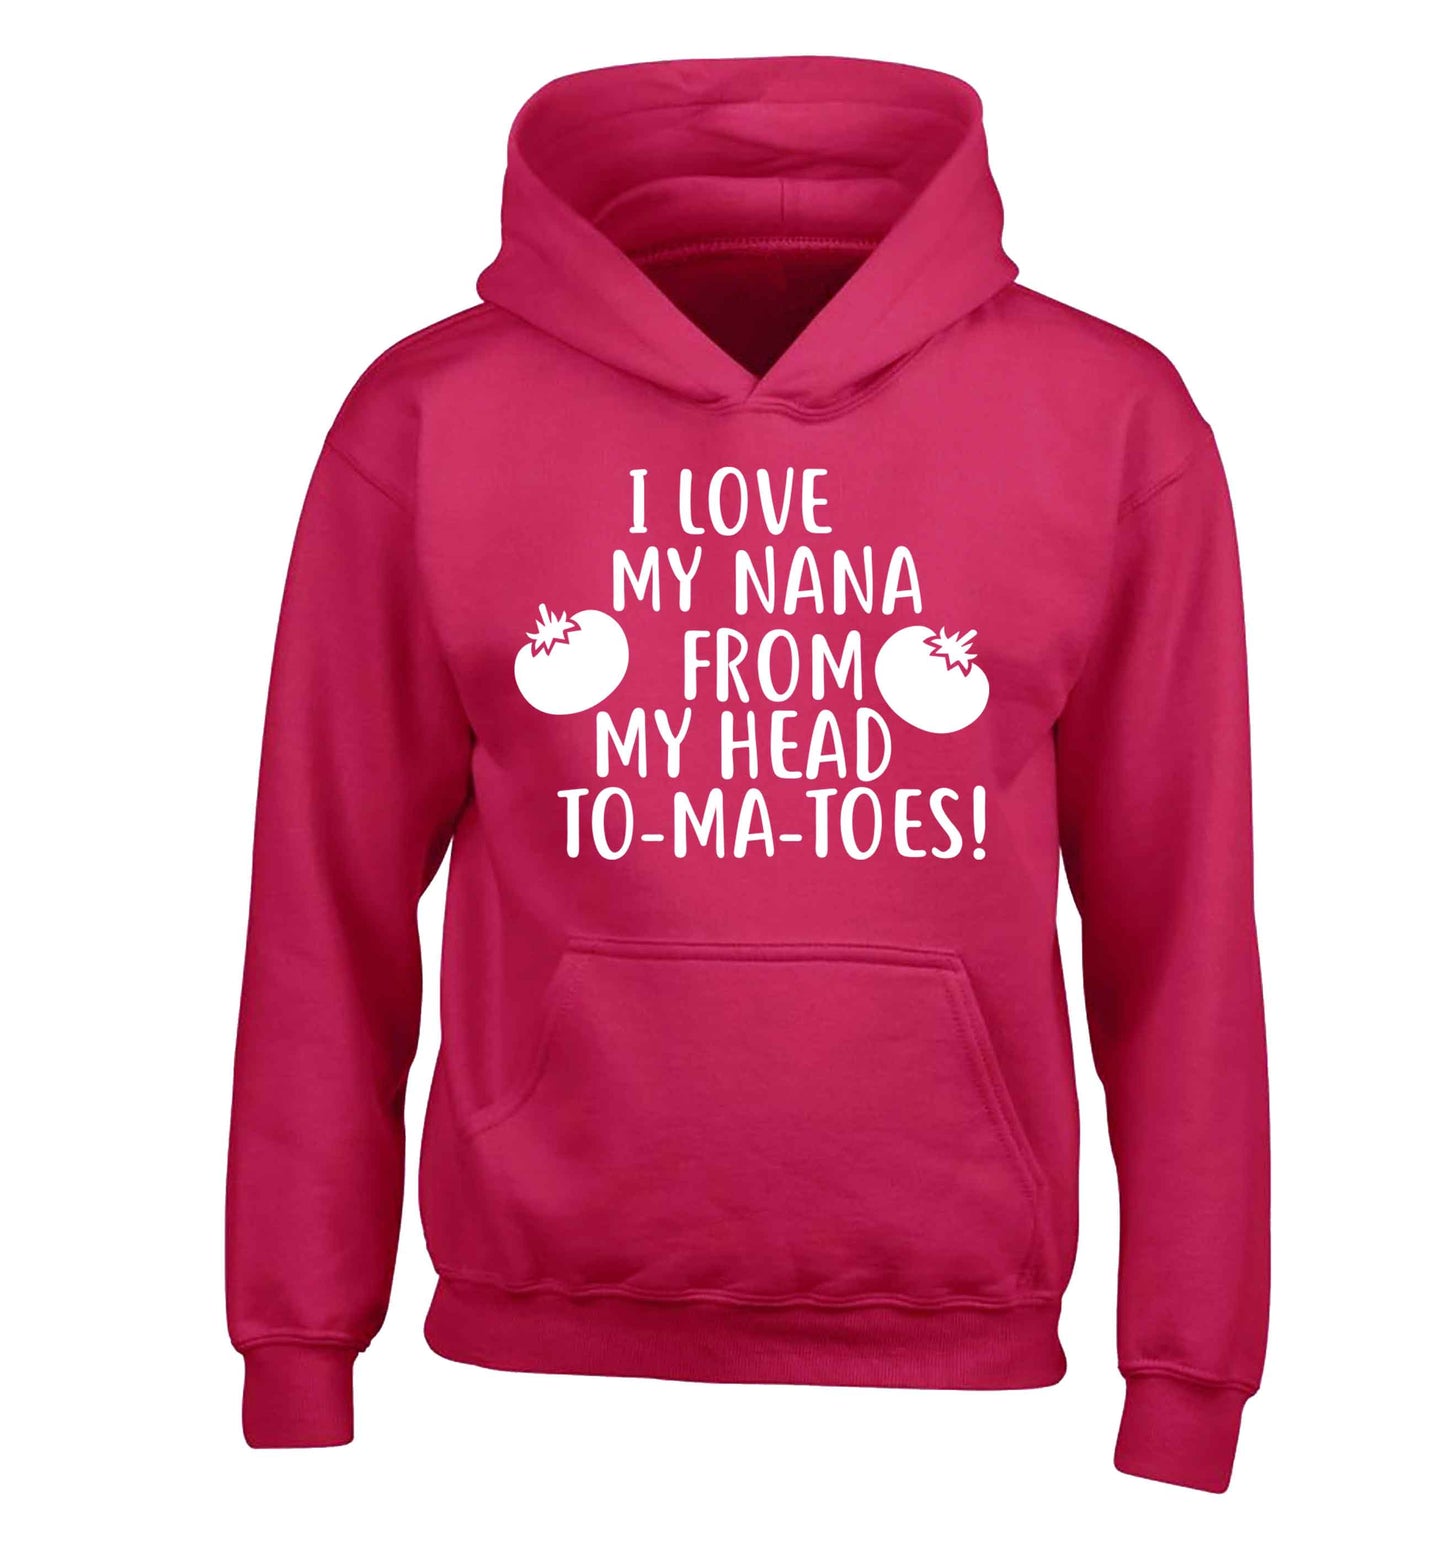 I love my nana from my head to-ma-toes children's pink hoodie 12-13 Years